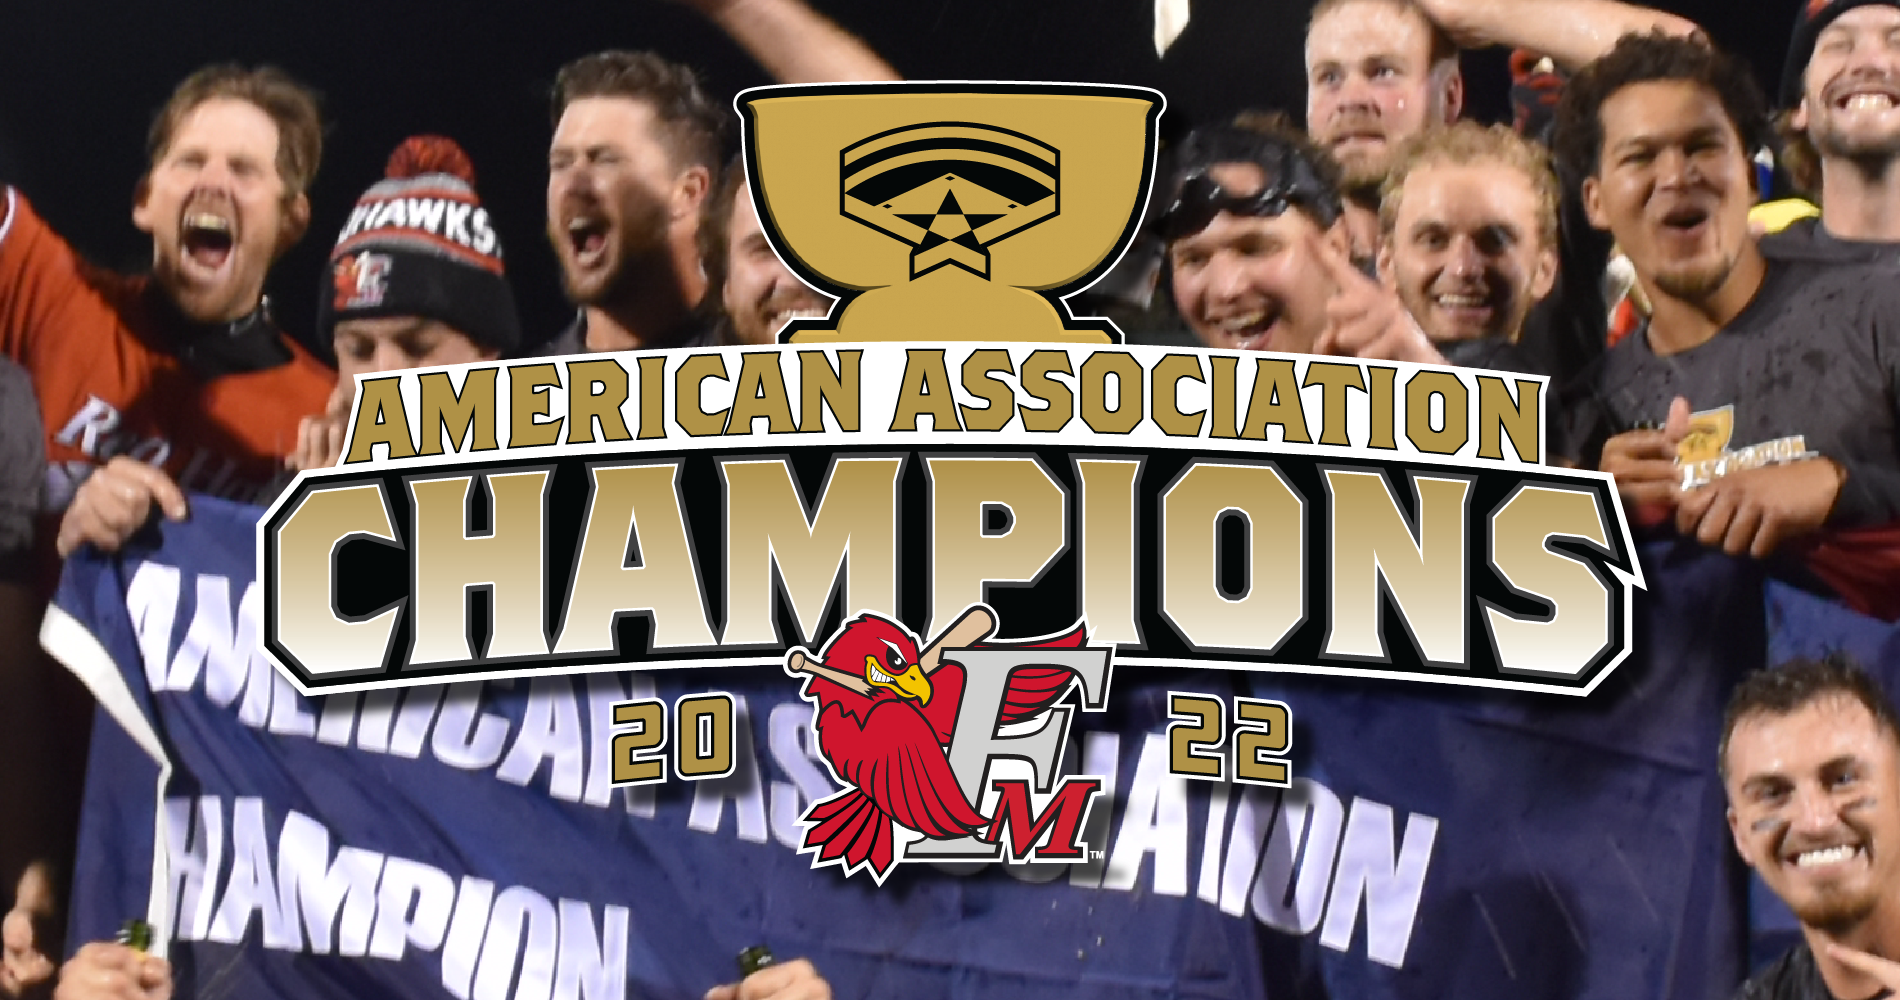 REDHAWKS WIN FIRST AAPB CHAMPIONSHIP IN EPIC 10 INNING GAME FIVE